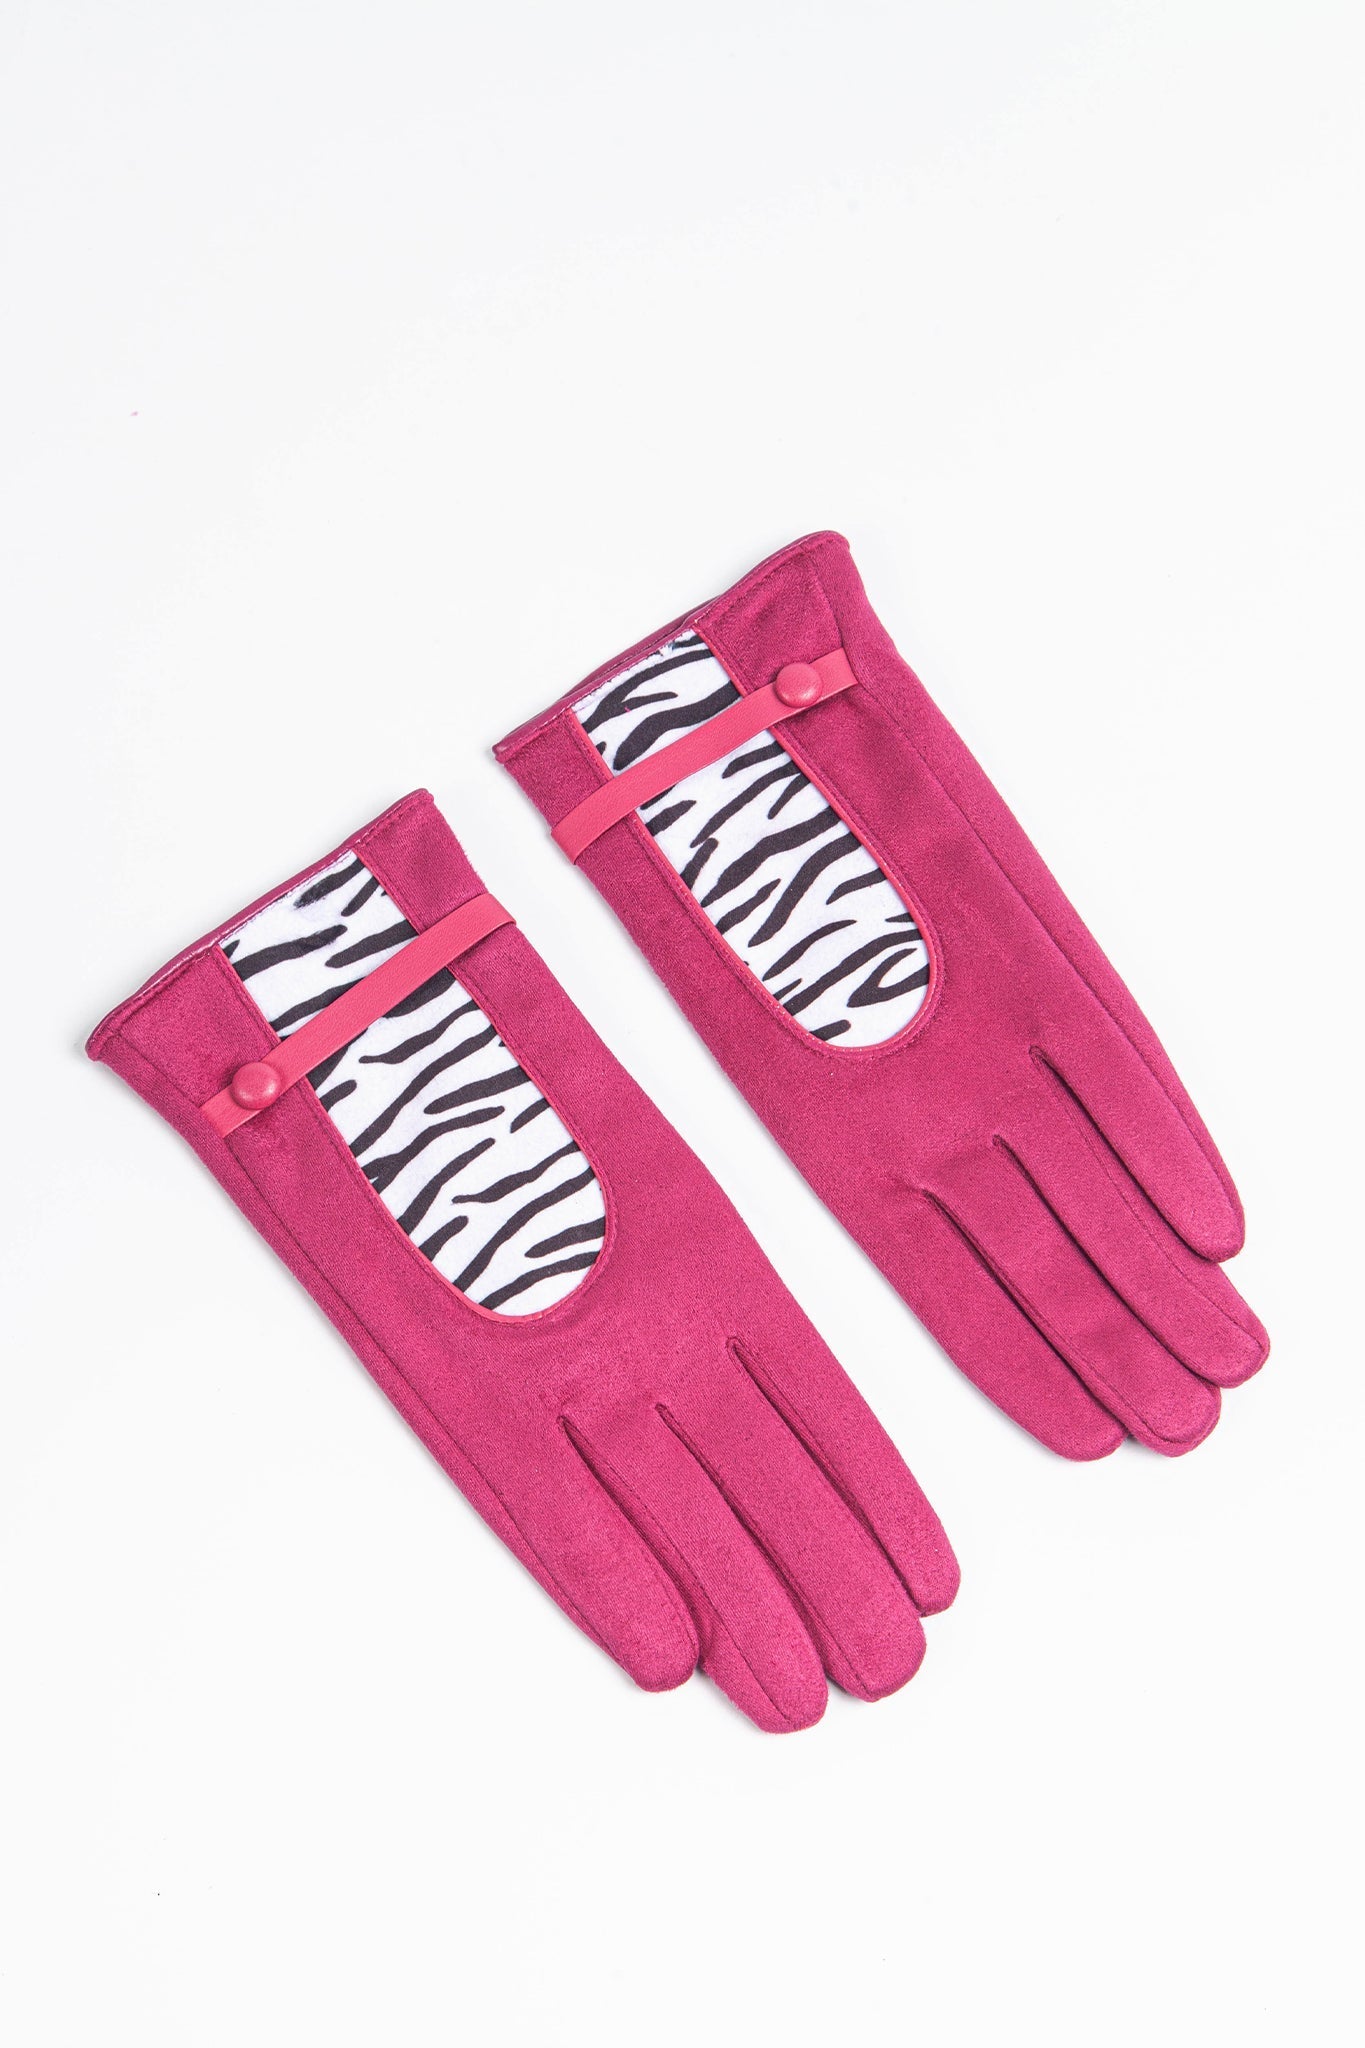 pink touchscreen gloves with a black and white zebra print panel